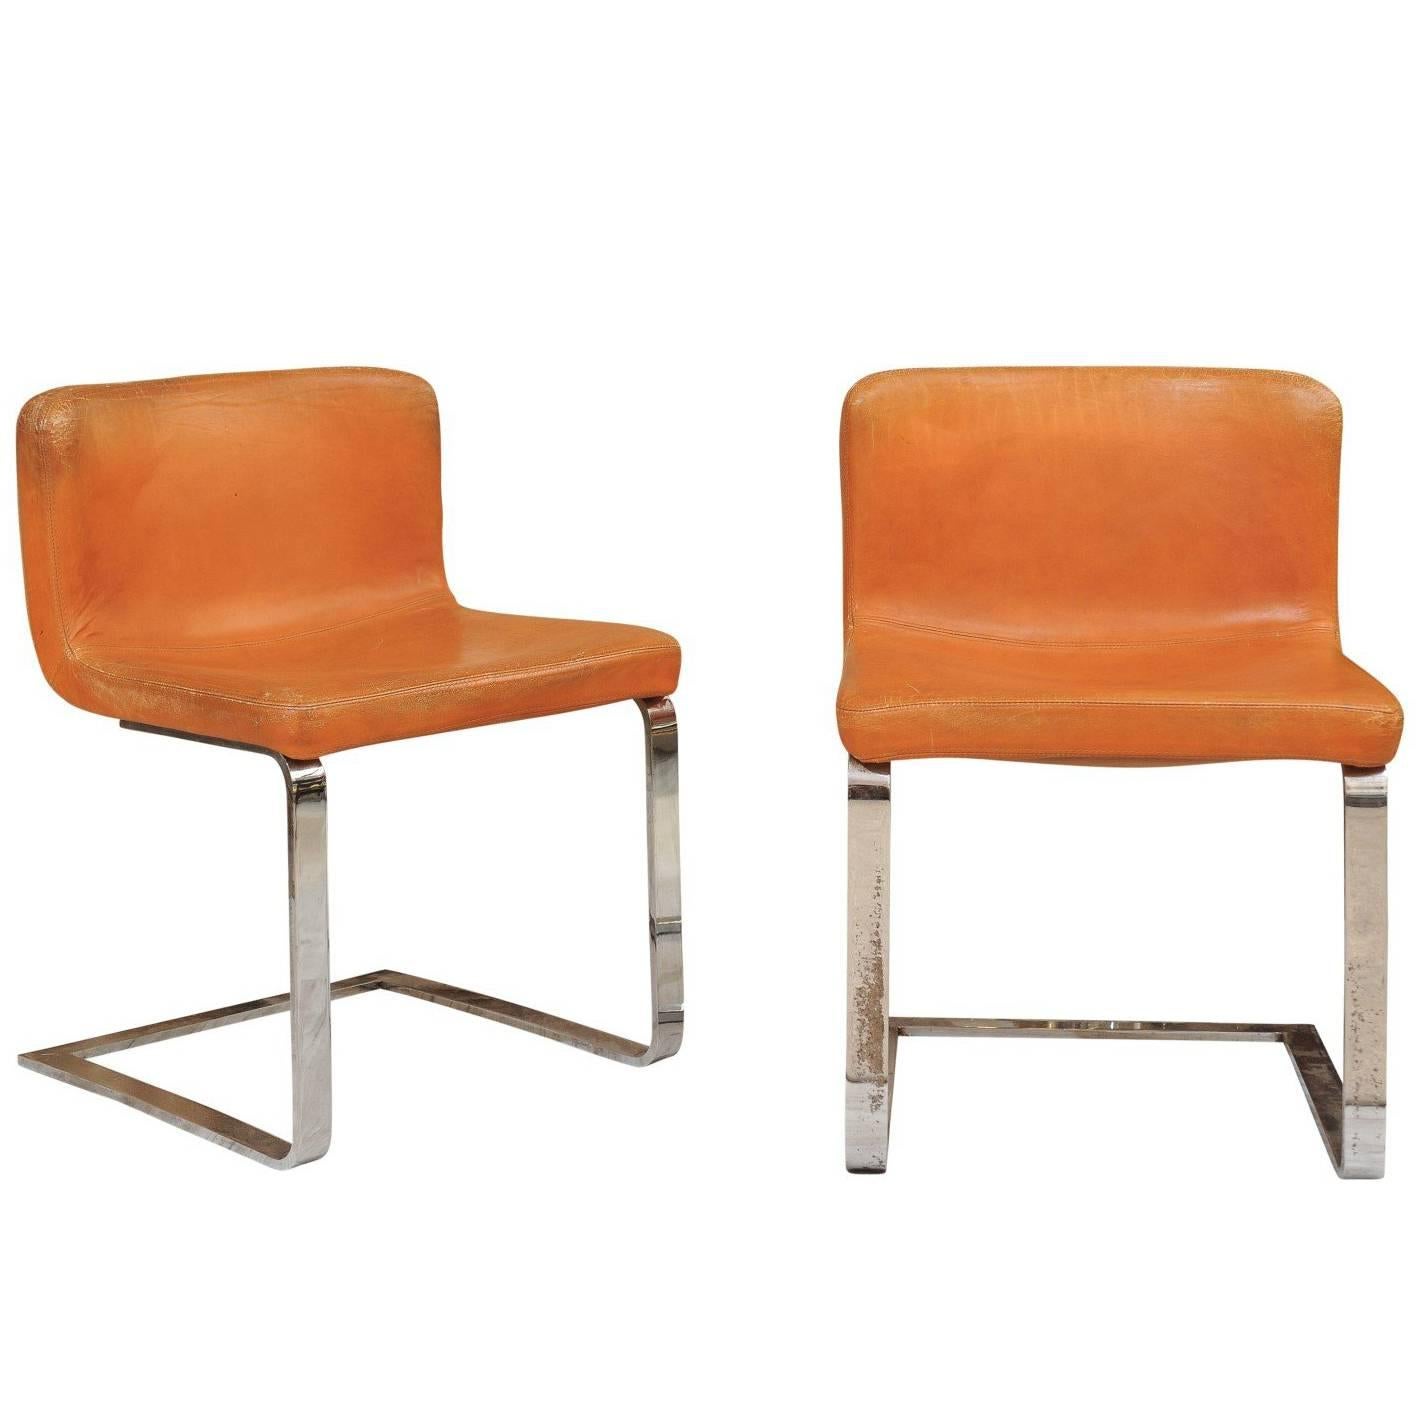 Pair of French Mid-Century Modern Leather and Chrome Accent Chairs